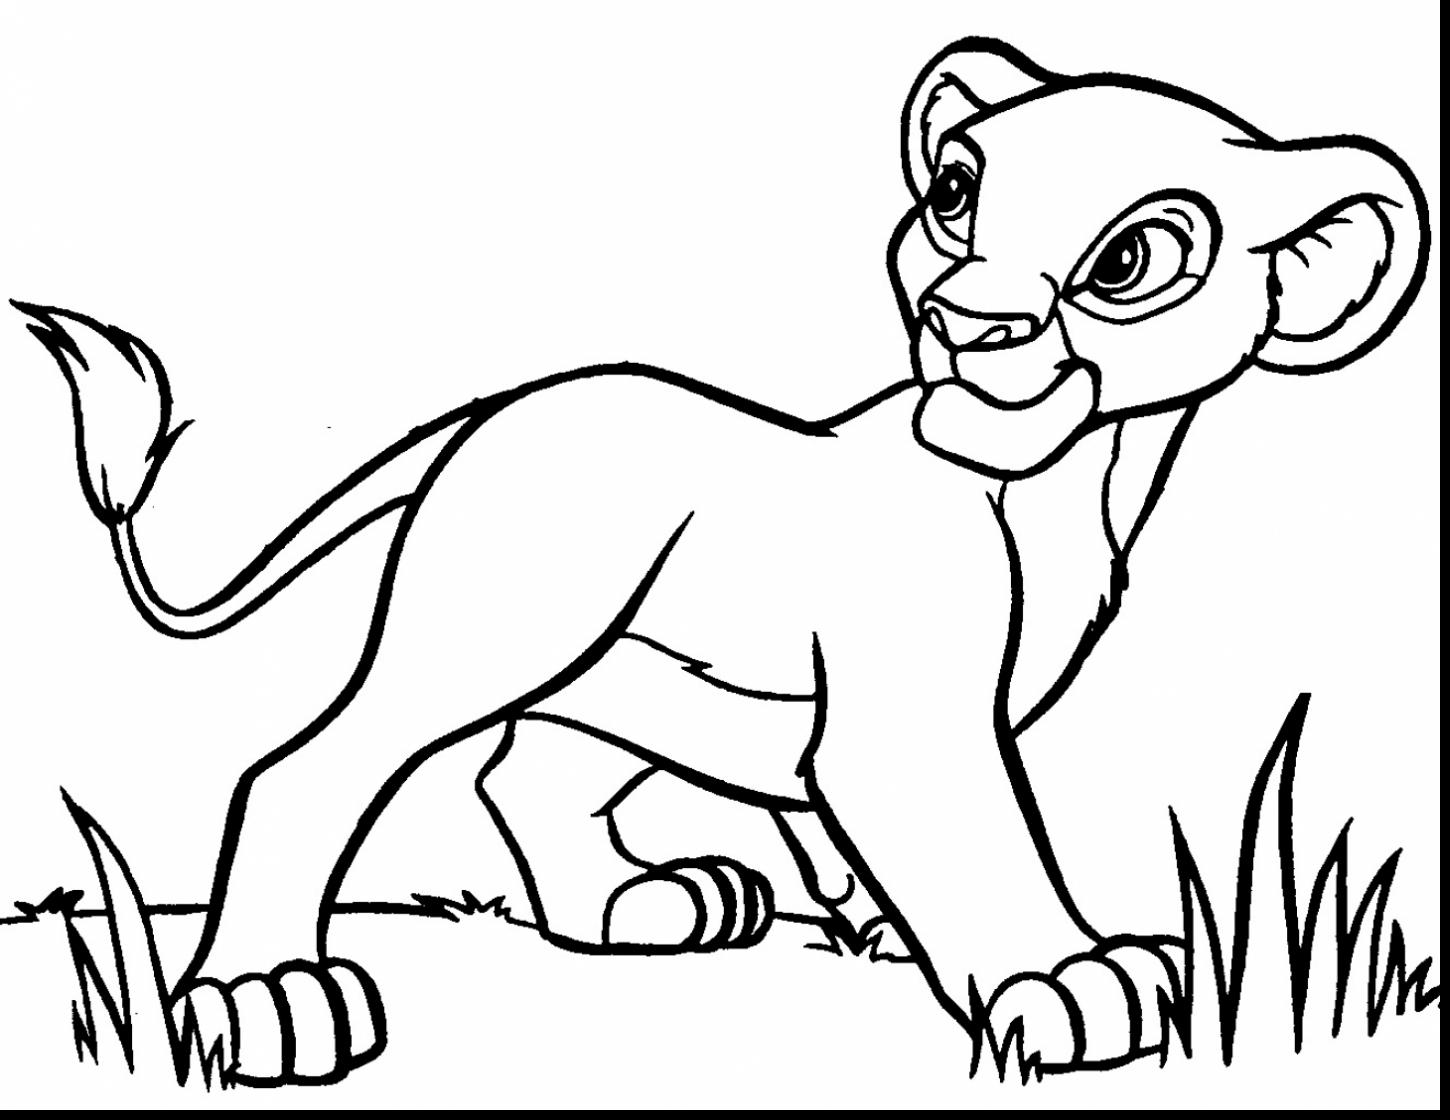 White Lion coloring #16, Download drawings